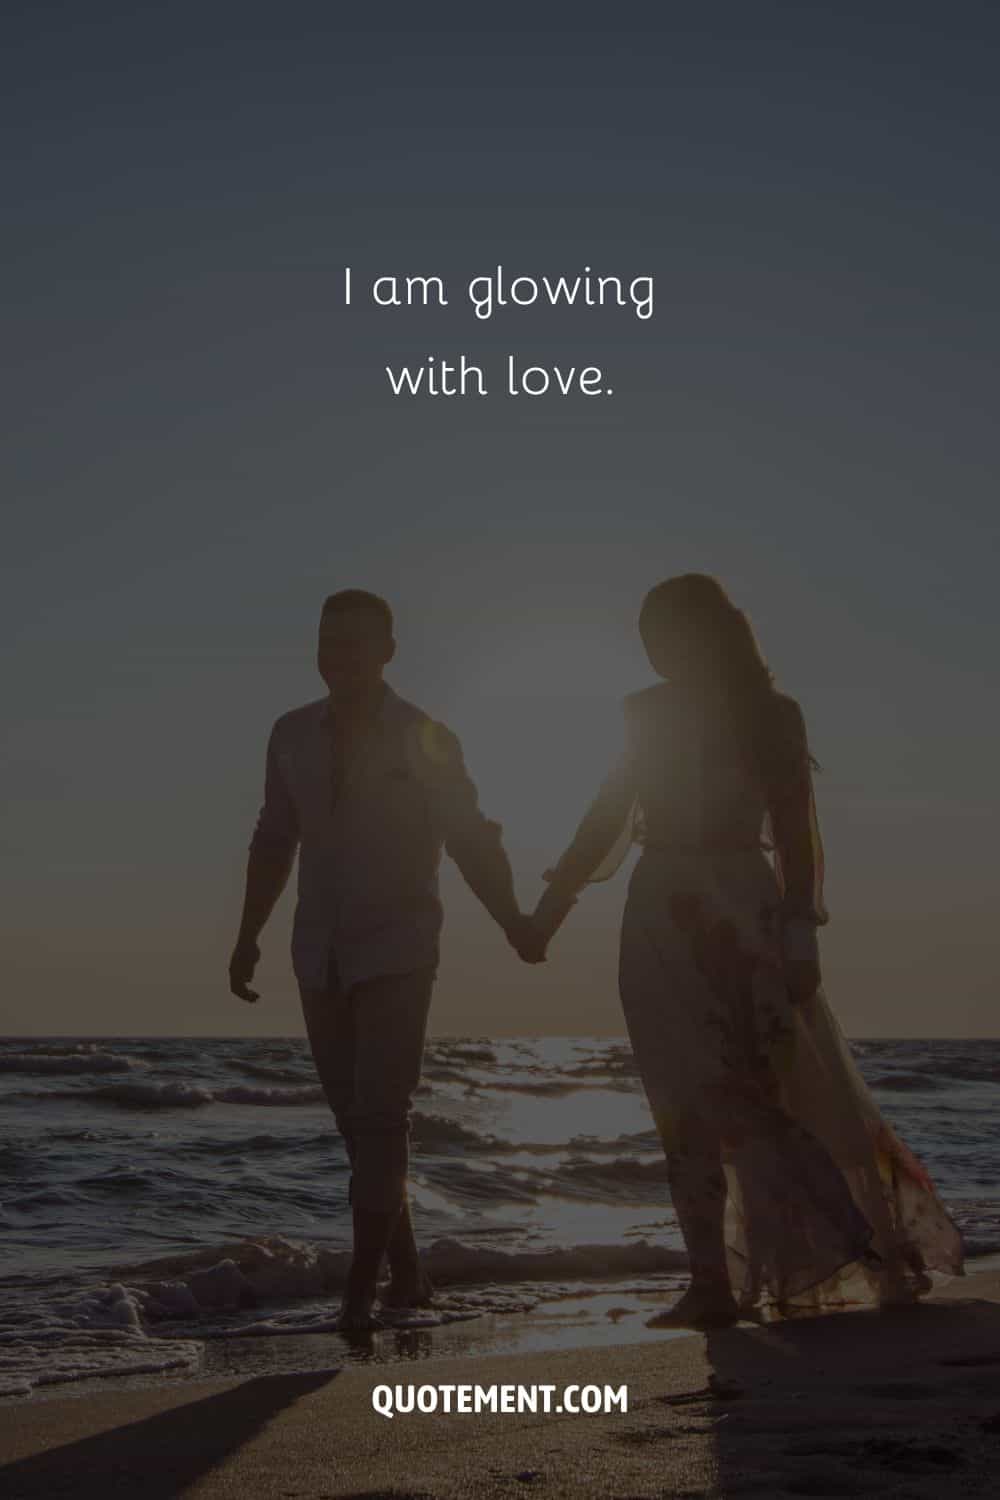 Image of a romantic beachwalk representing an affirmation for attracting love.
